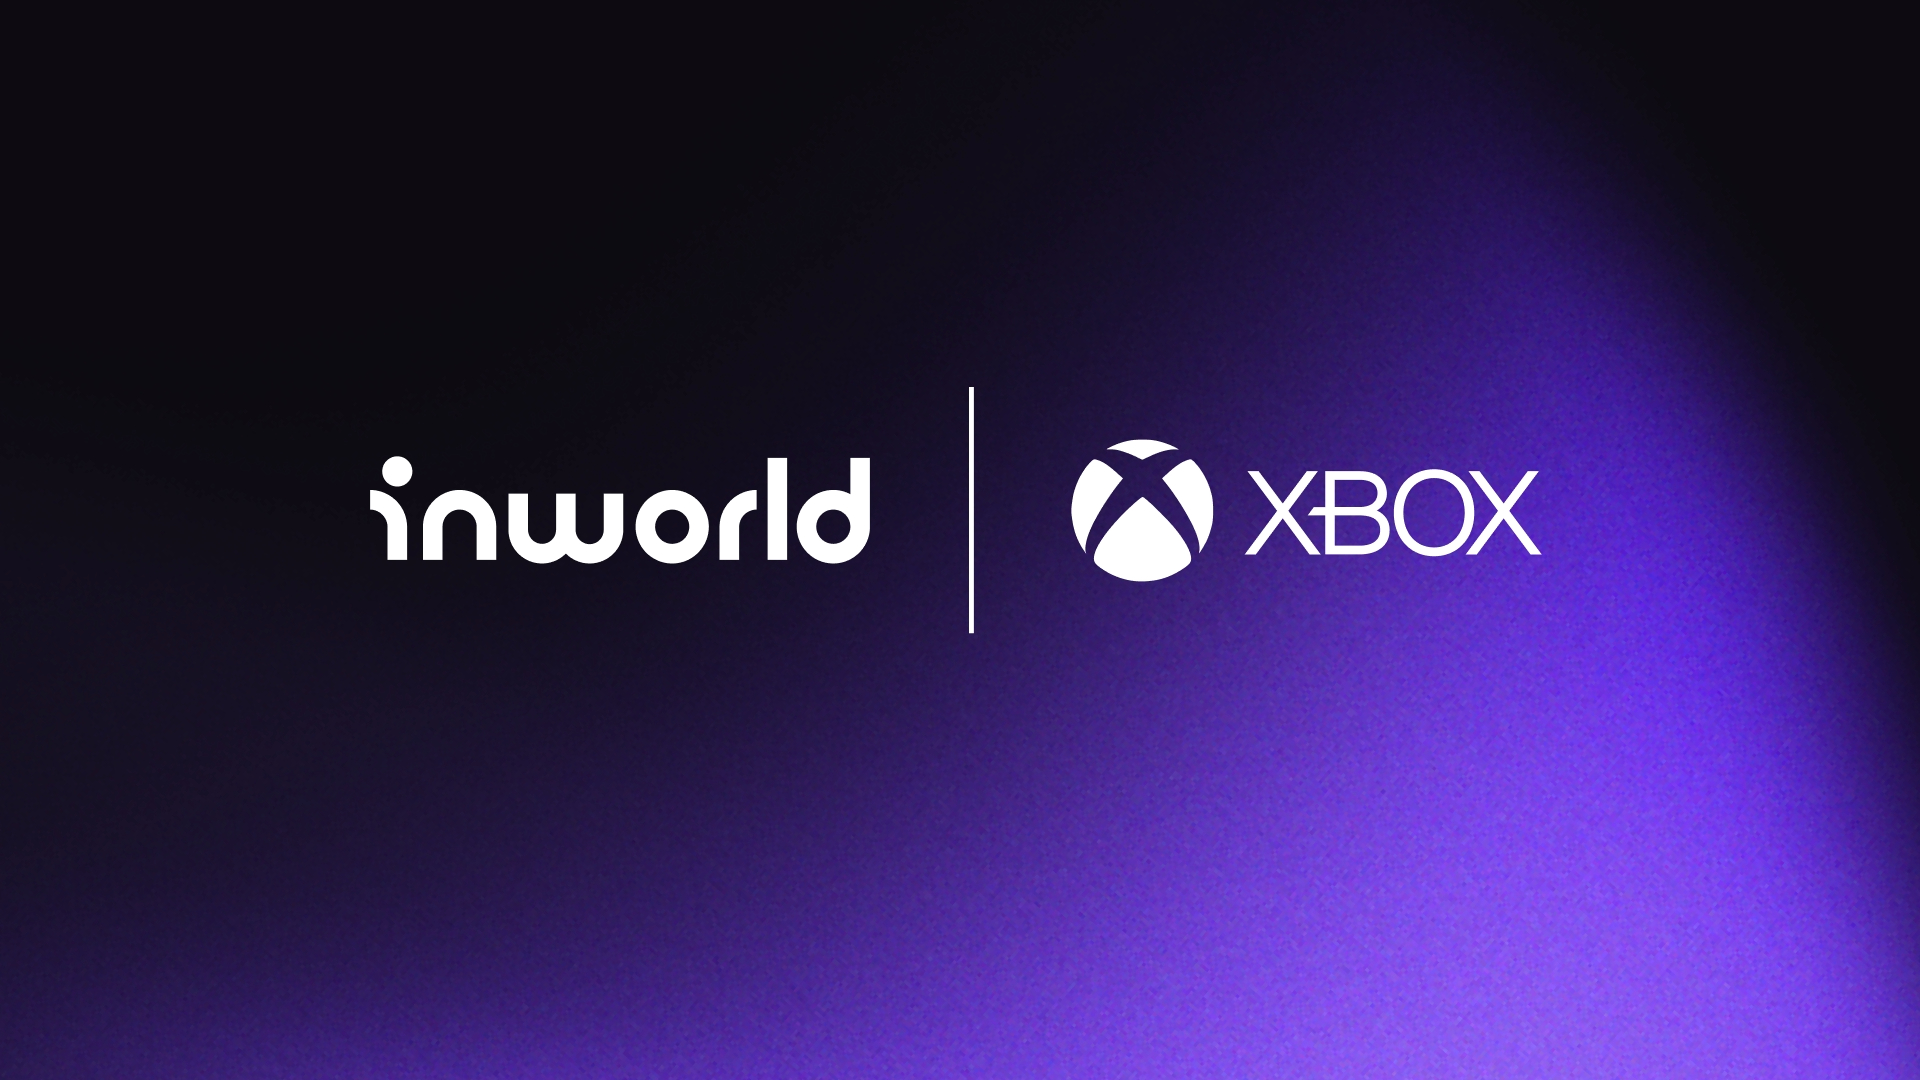 The art for Xbox and Inworld's AI partnership.